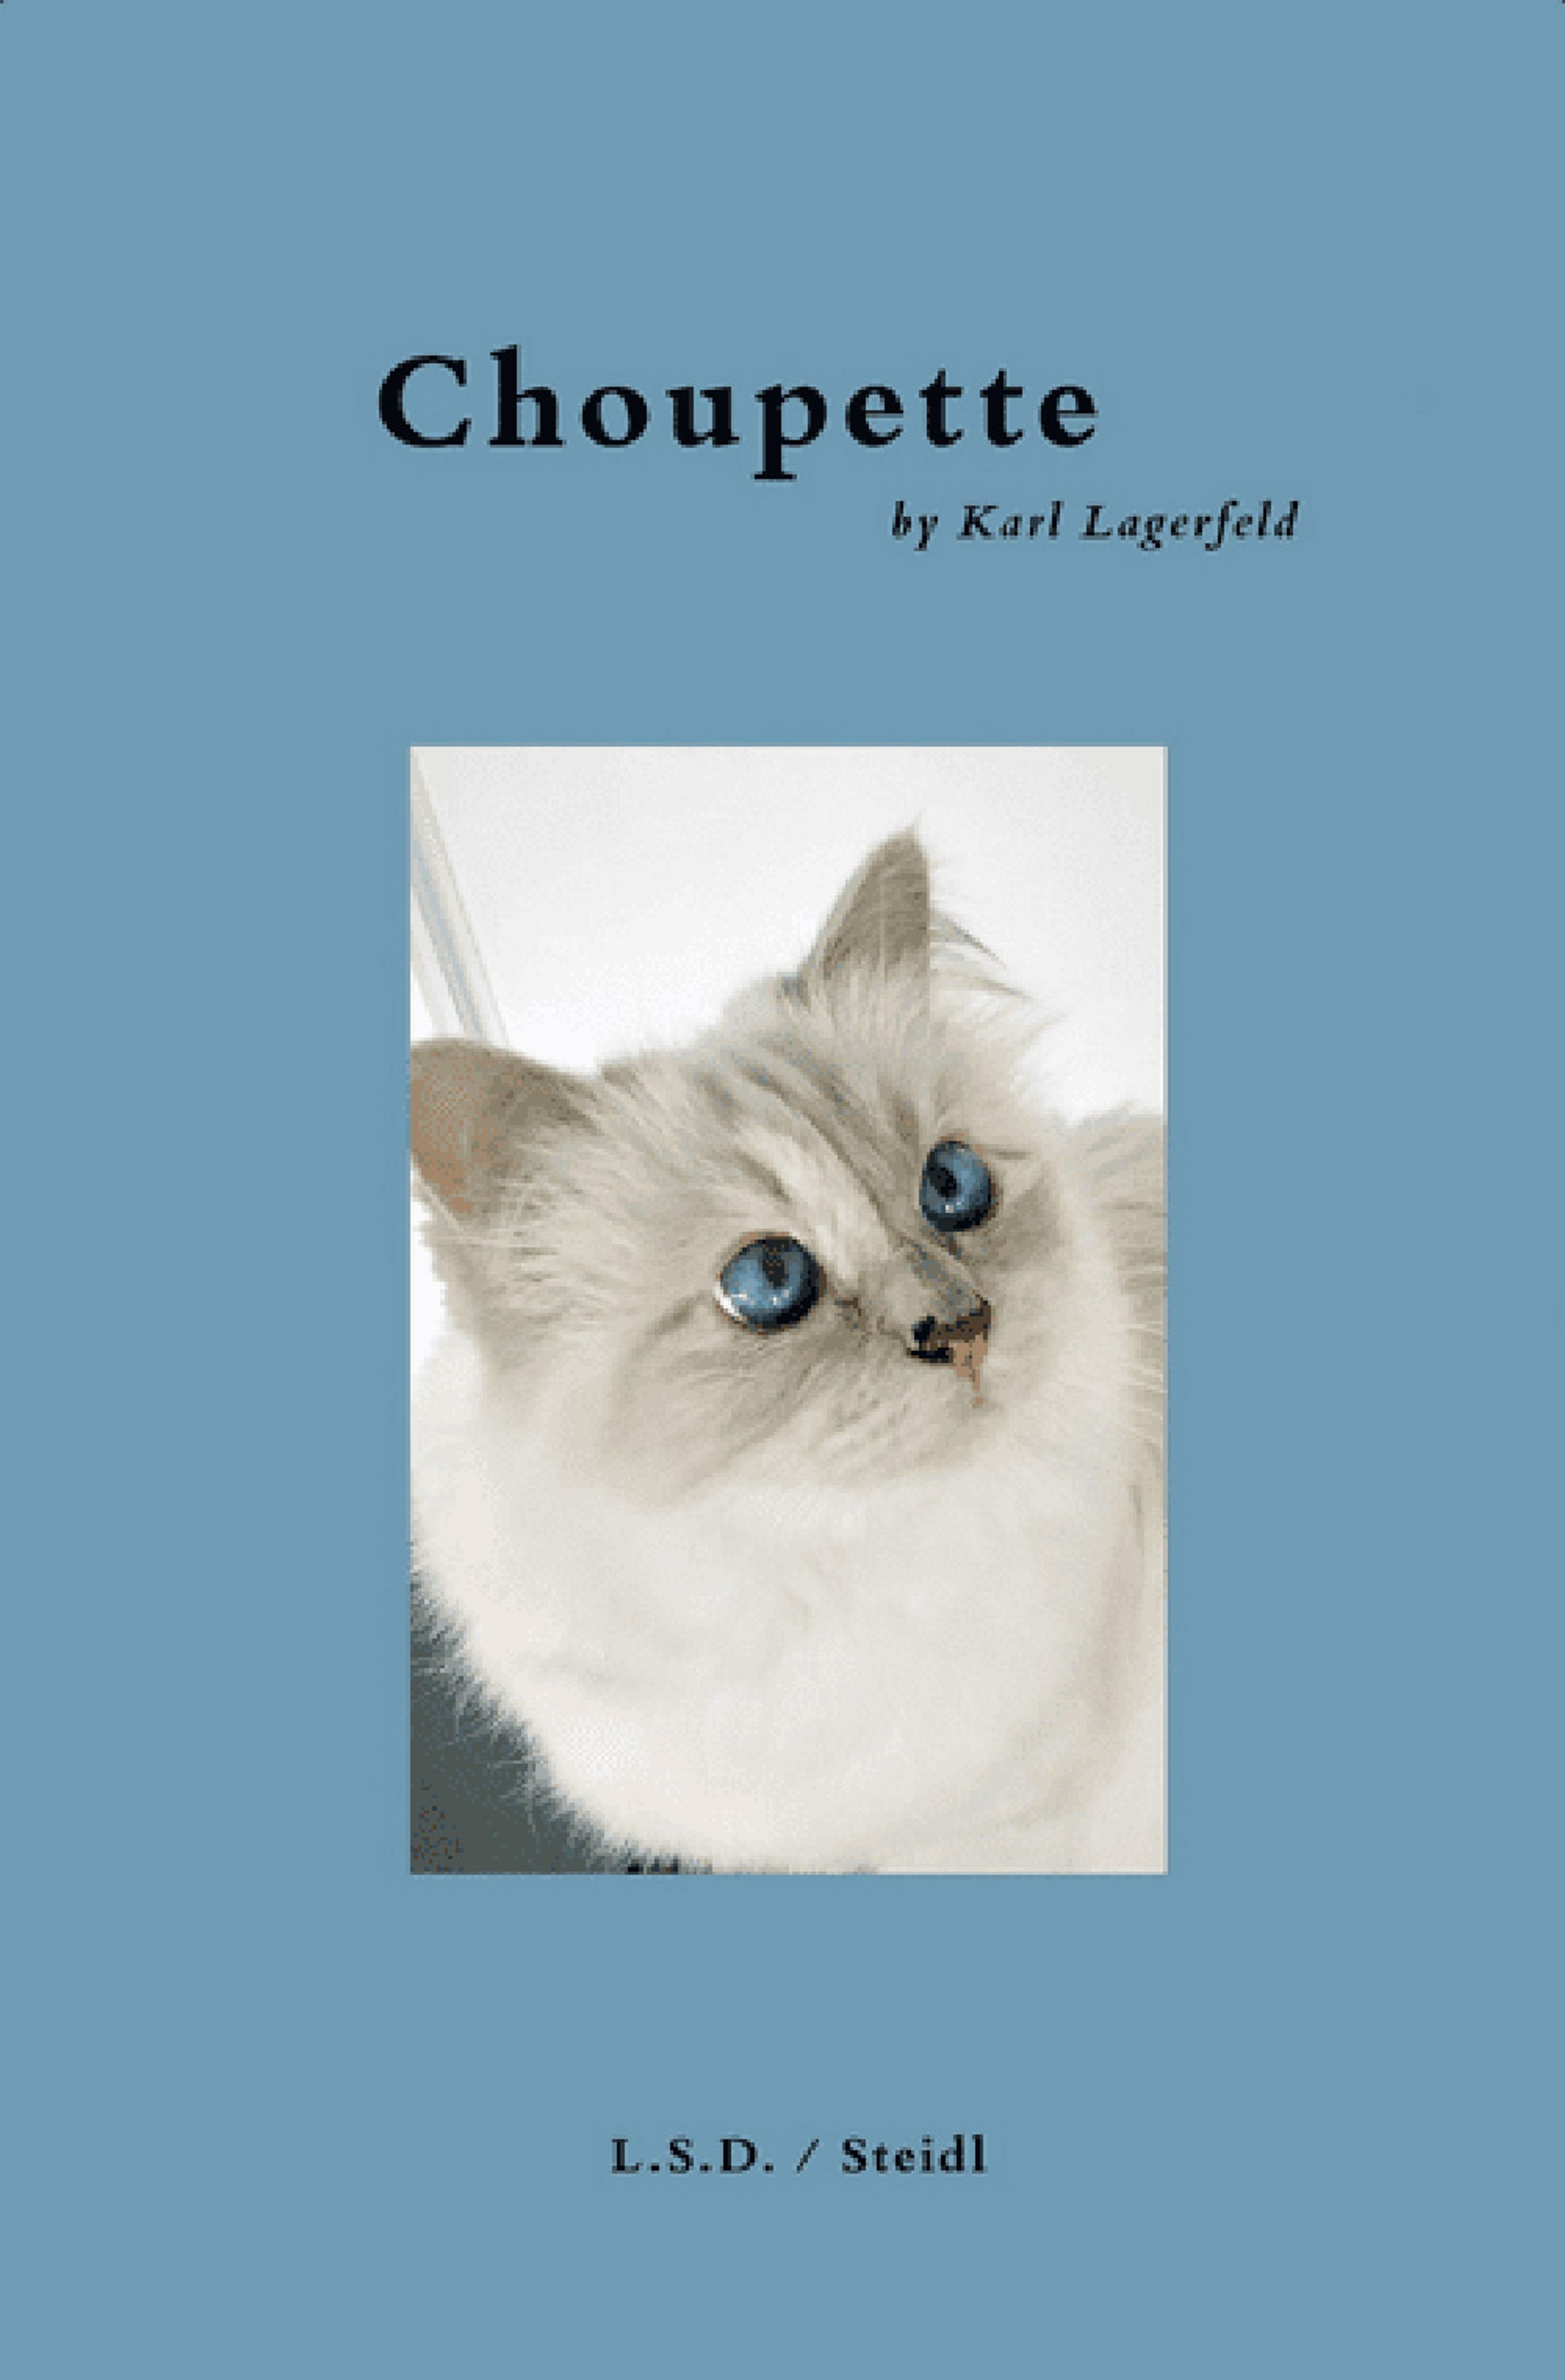 Choupette Karl Lagerfeld - New Mags